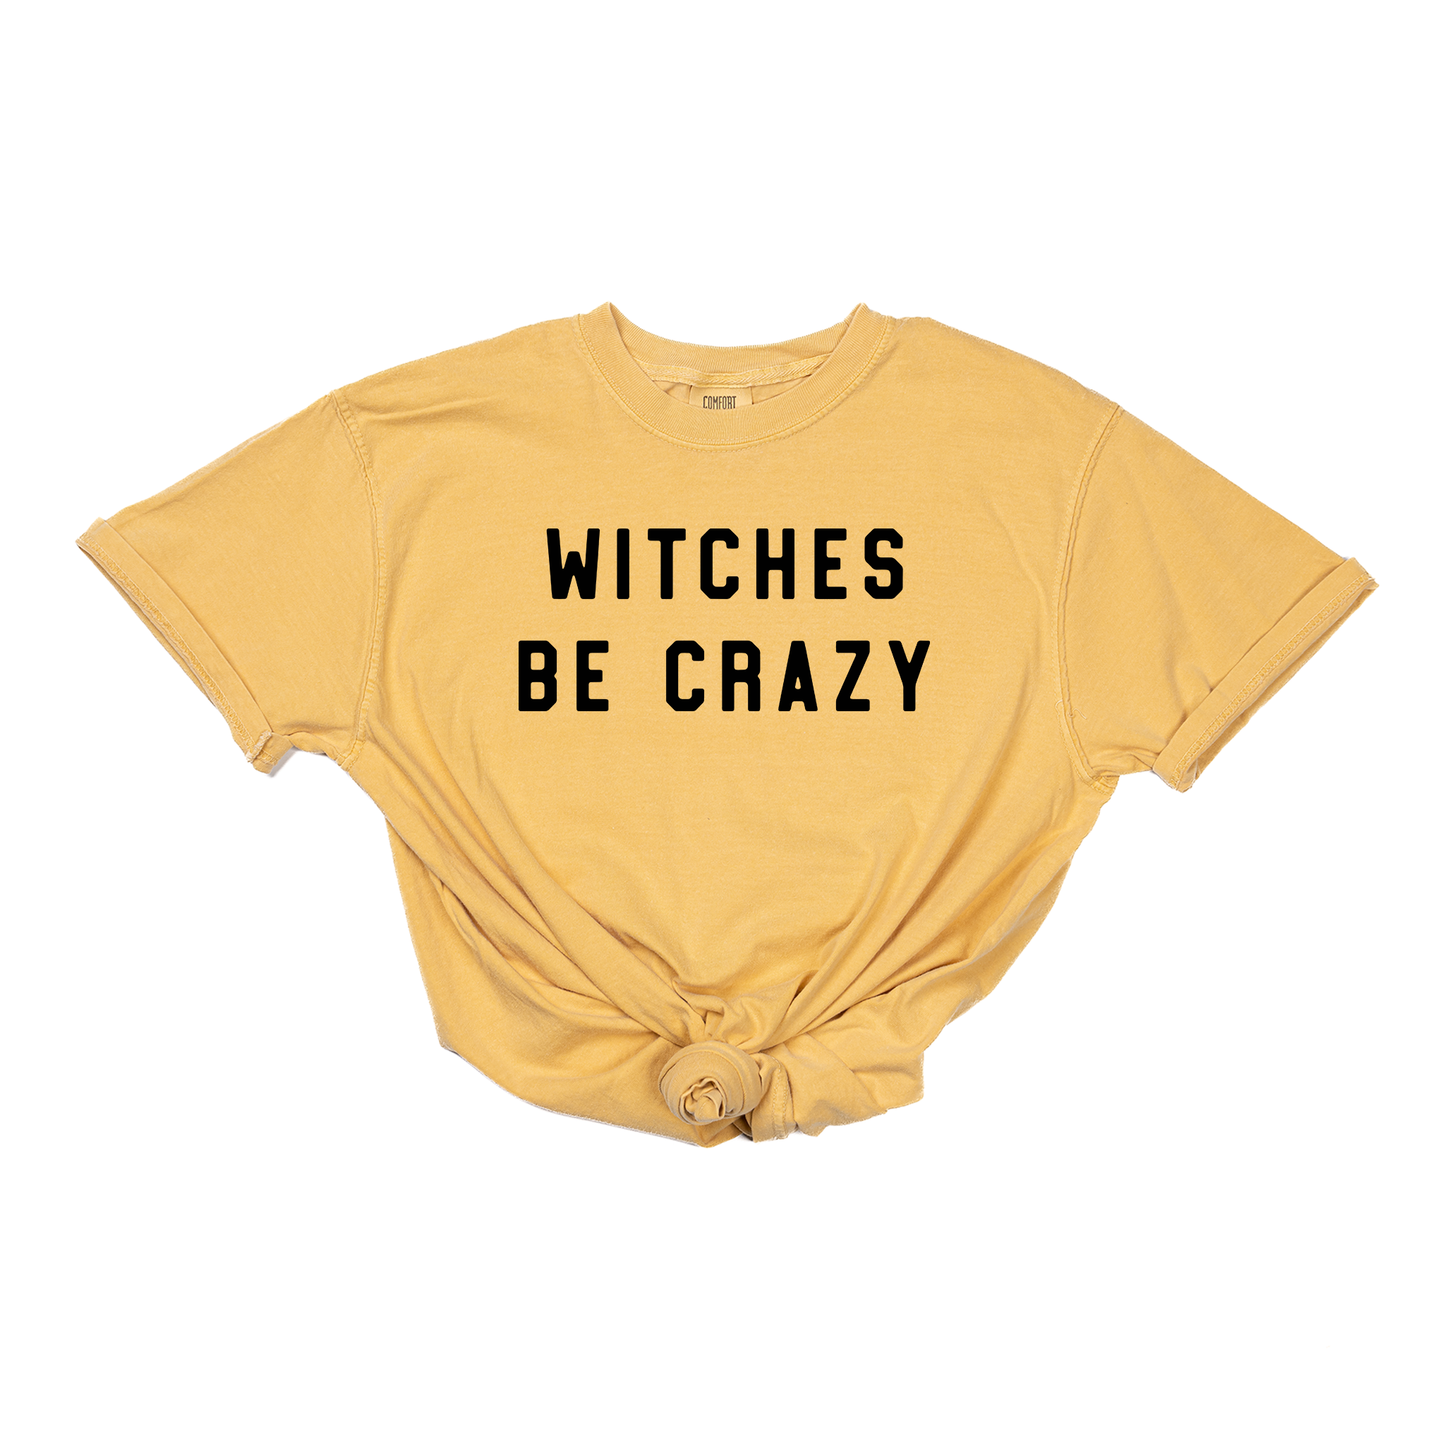 Witches Be Crazy (Black) - Tee (Vintage Mustard, Short Sleeve)